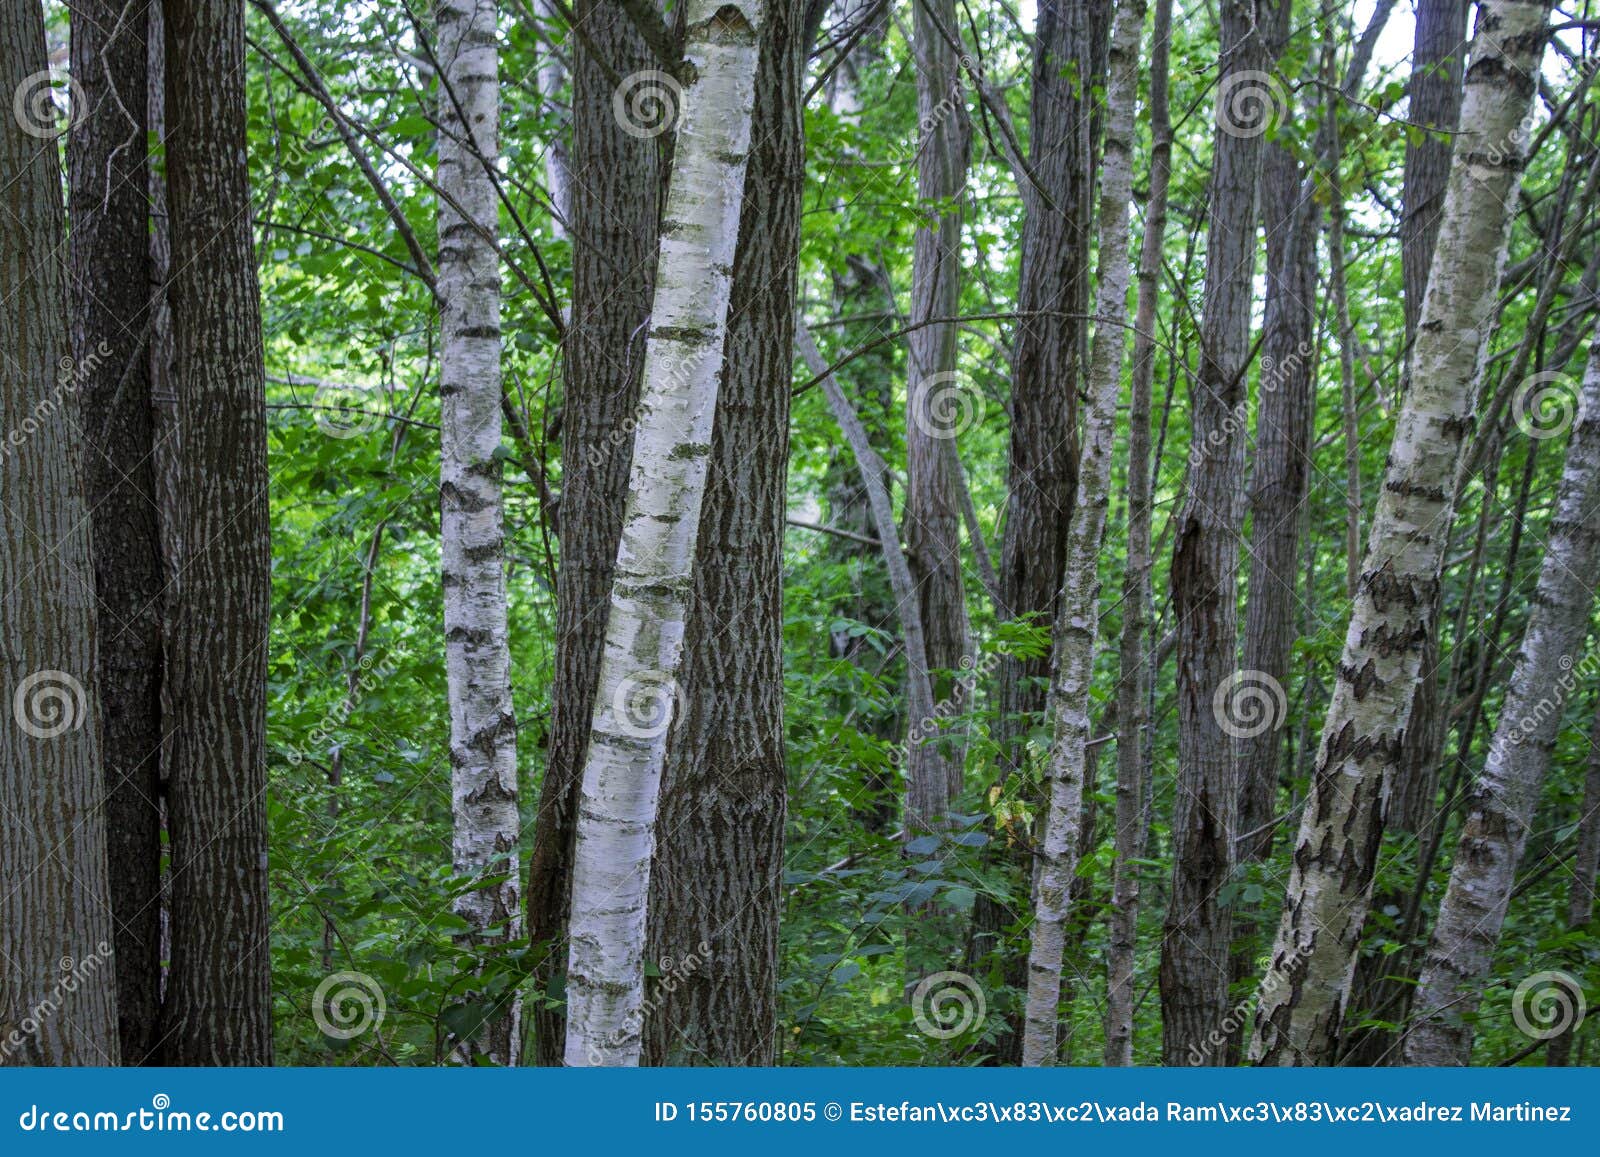 photography of a trunks and trees in a forest